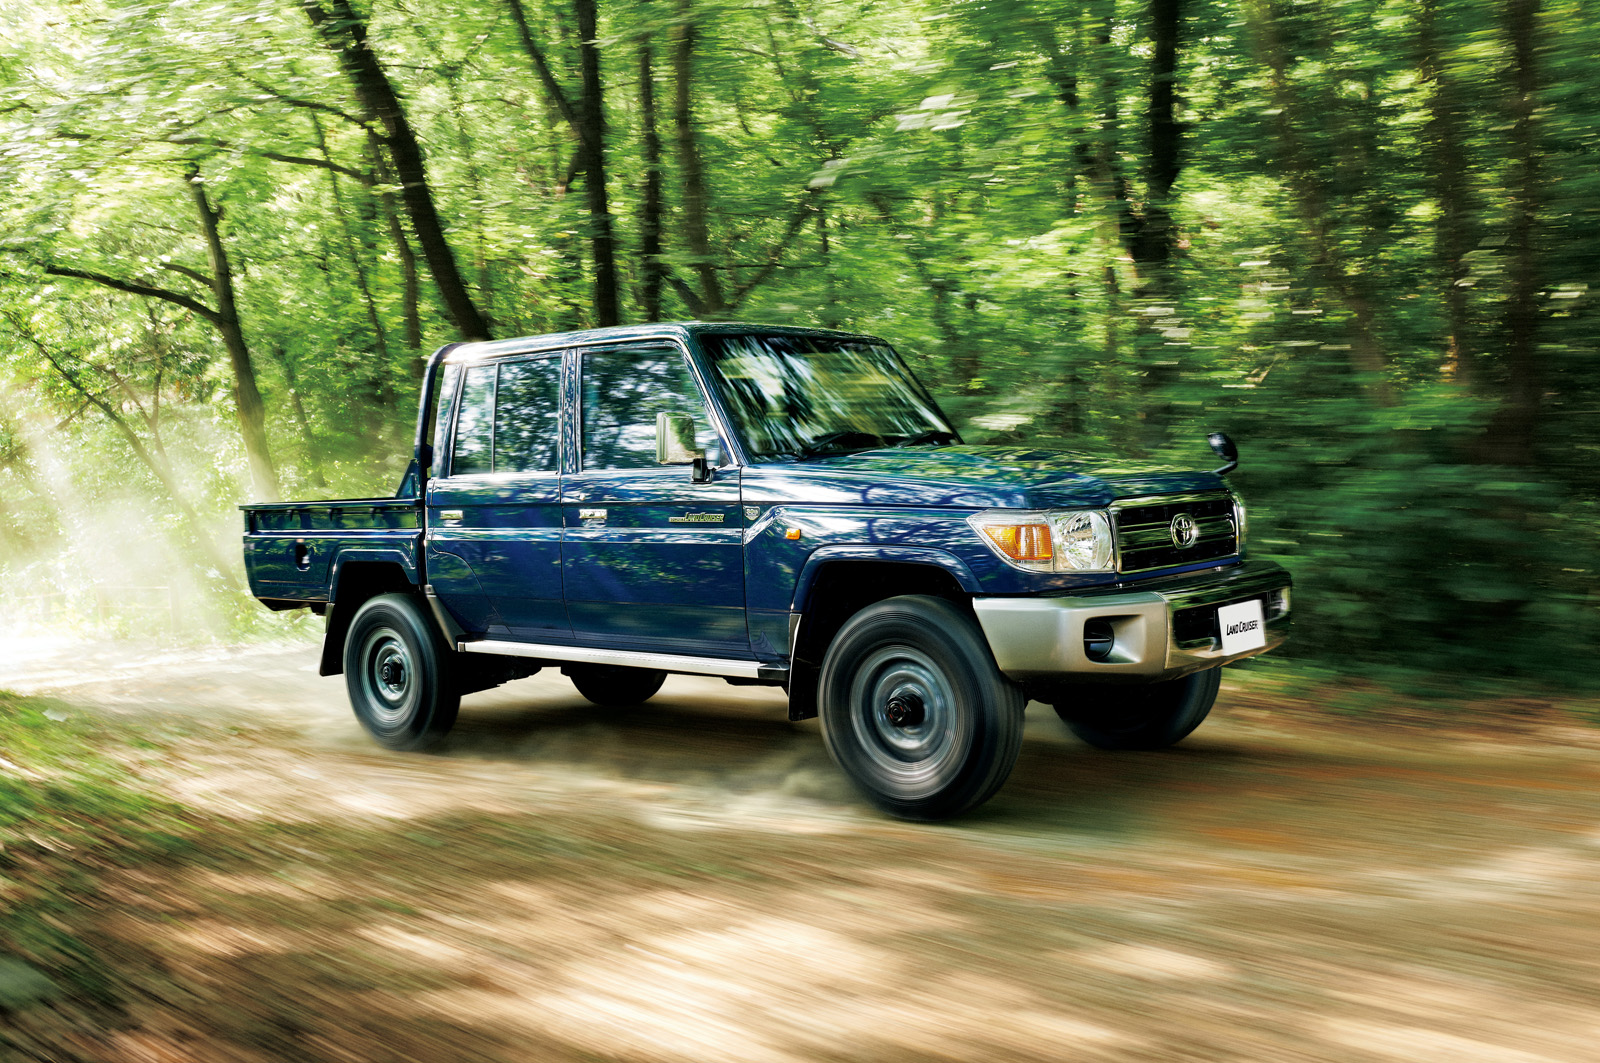 Check out the Reissued Toyota Land Cruiser 70 Pickup Truck! - The Fast ...